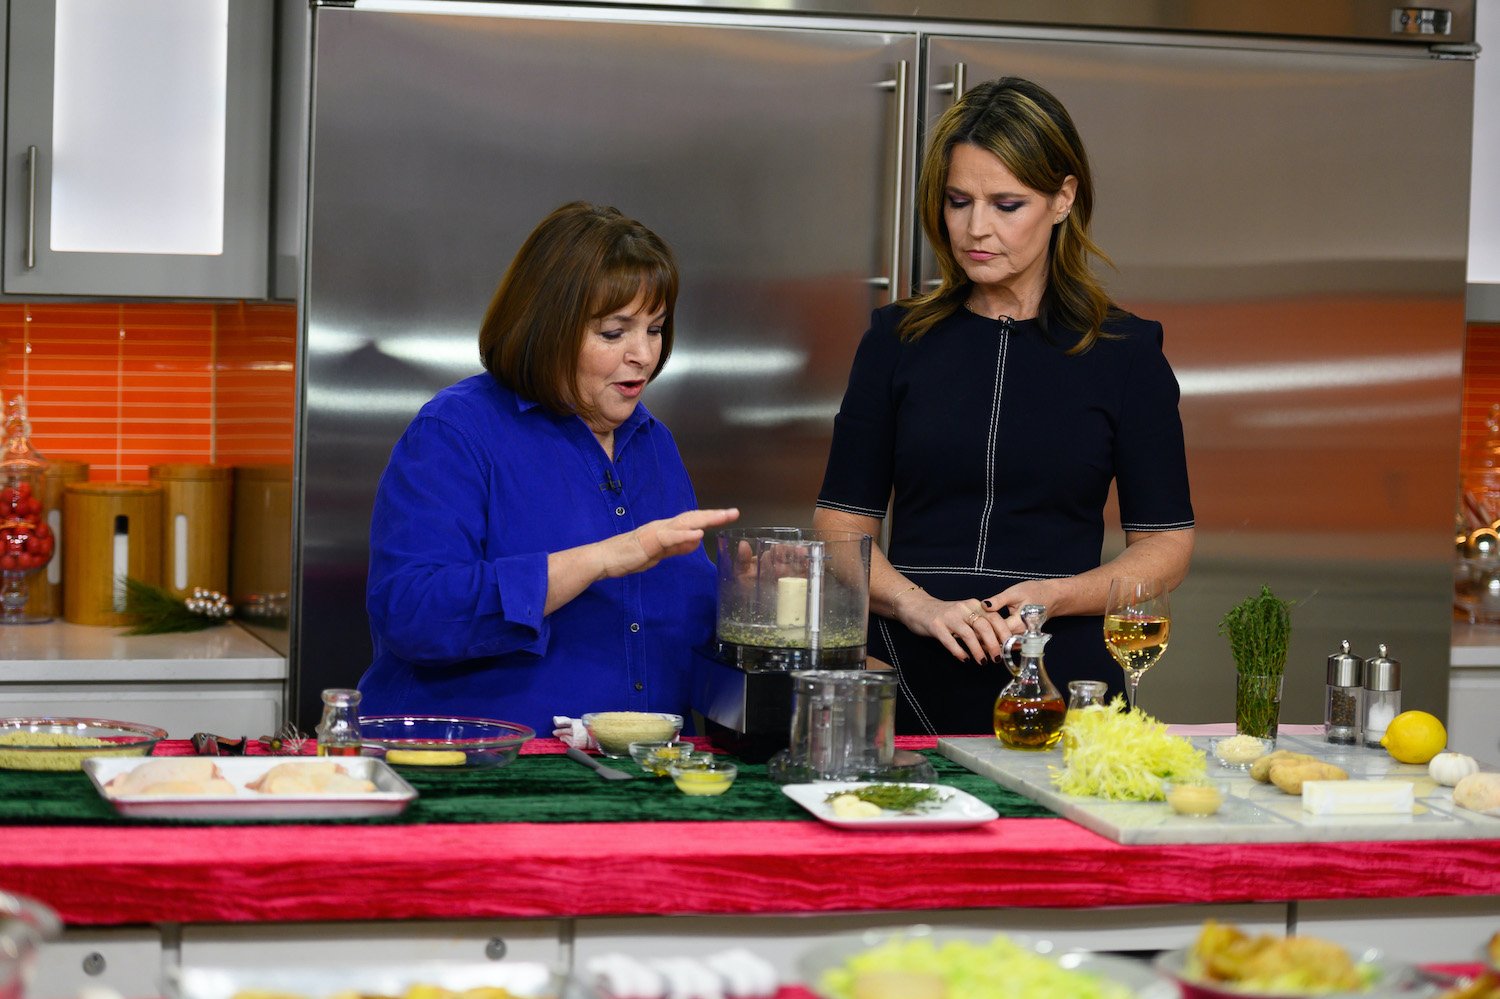 Ina Garten and Savannah Guthrie on the Today show during a cooking segment